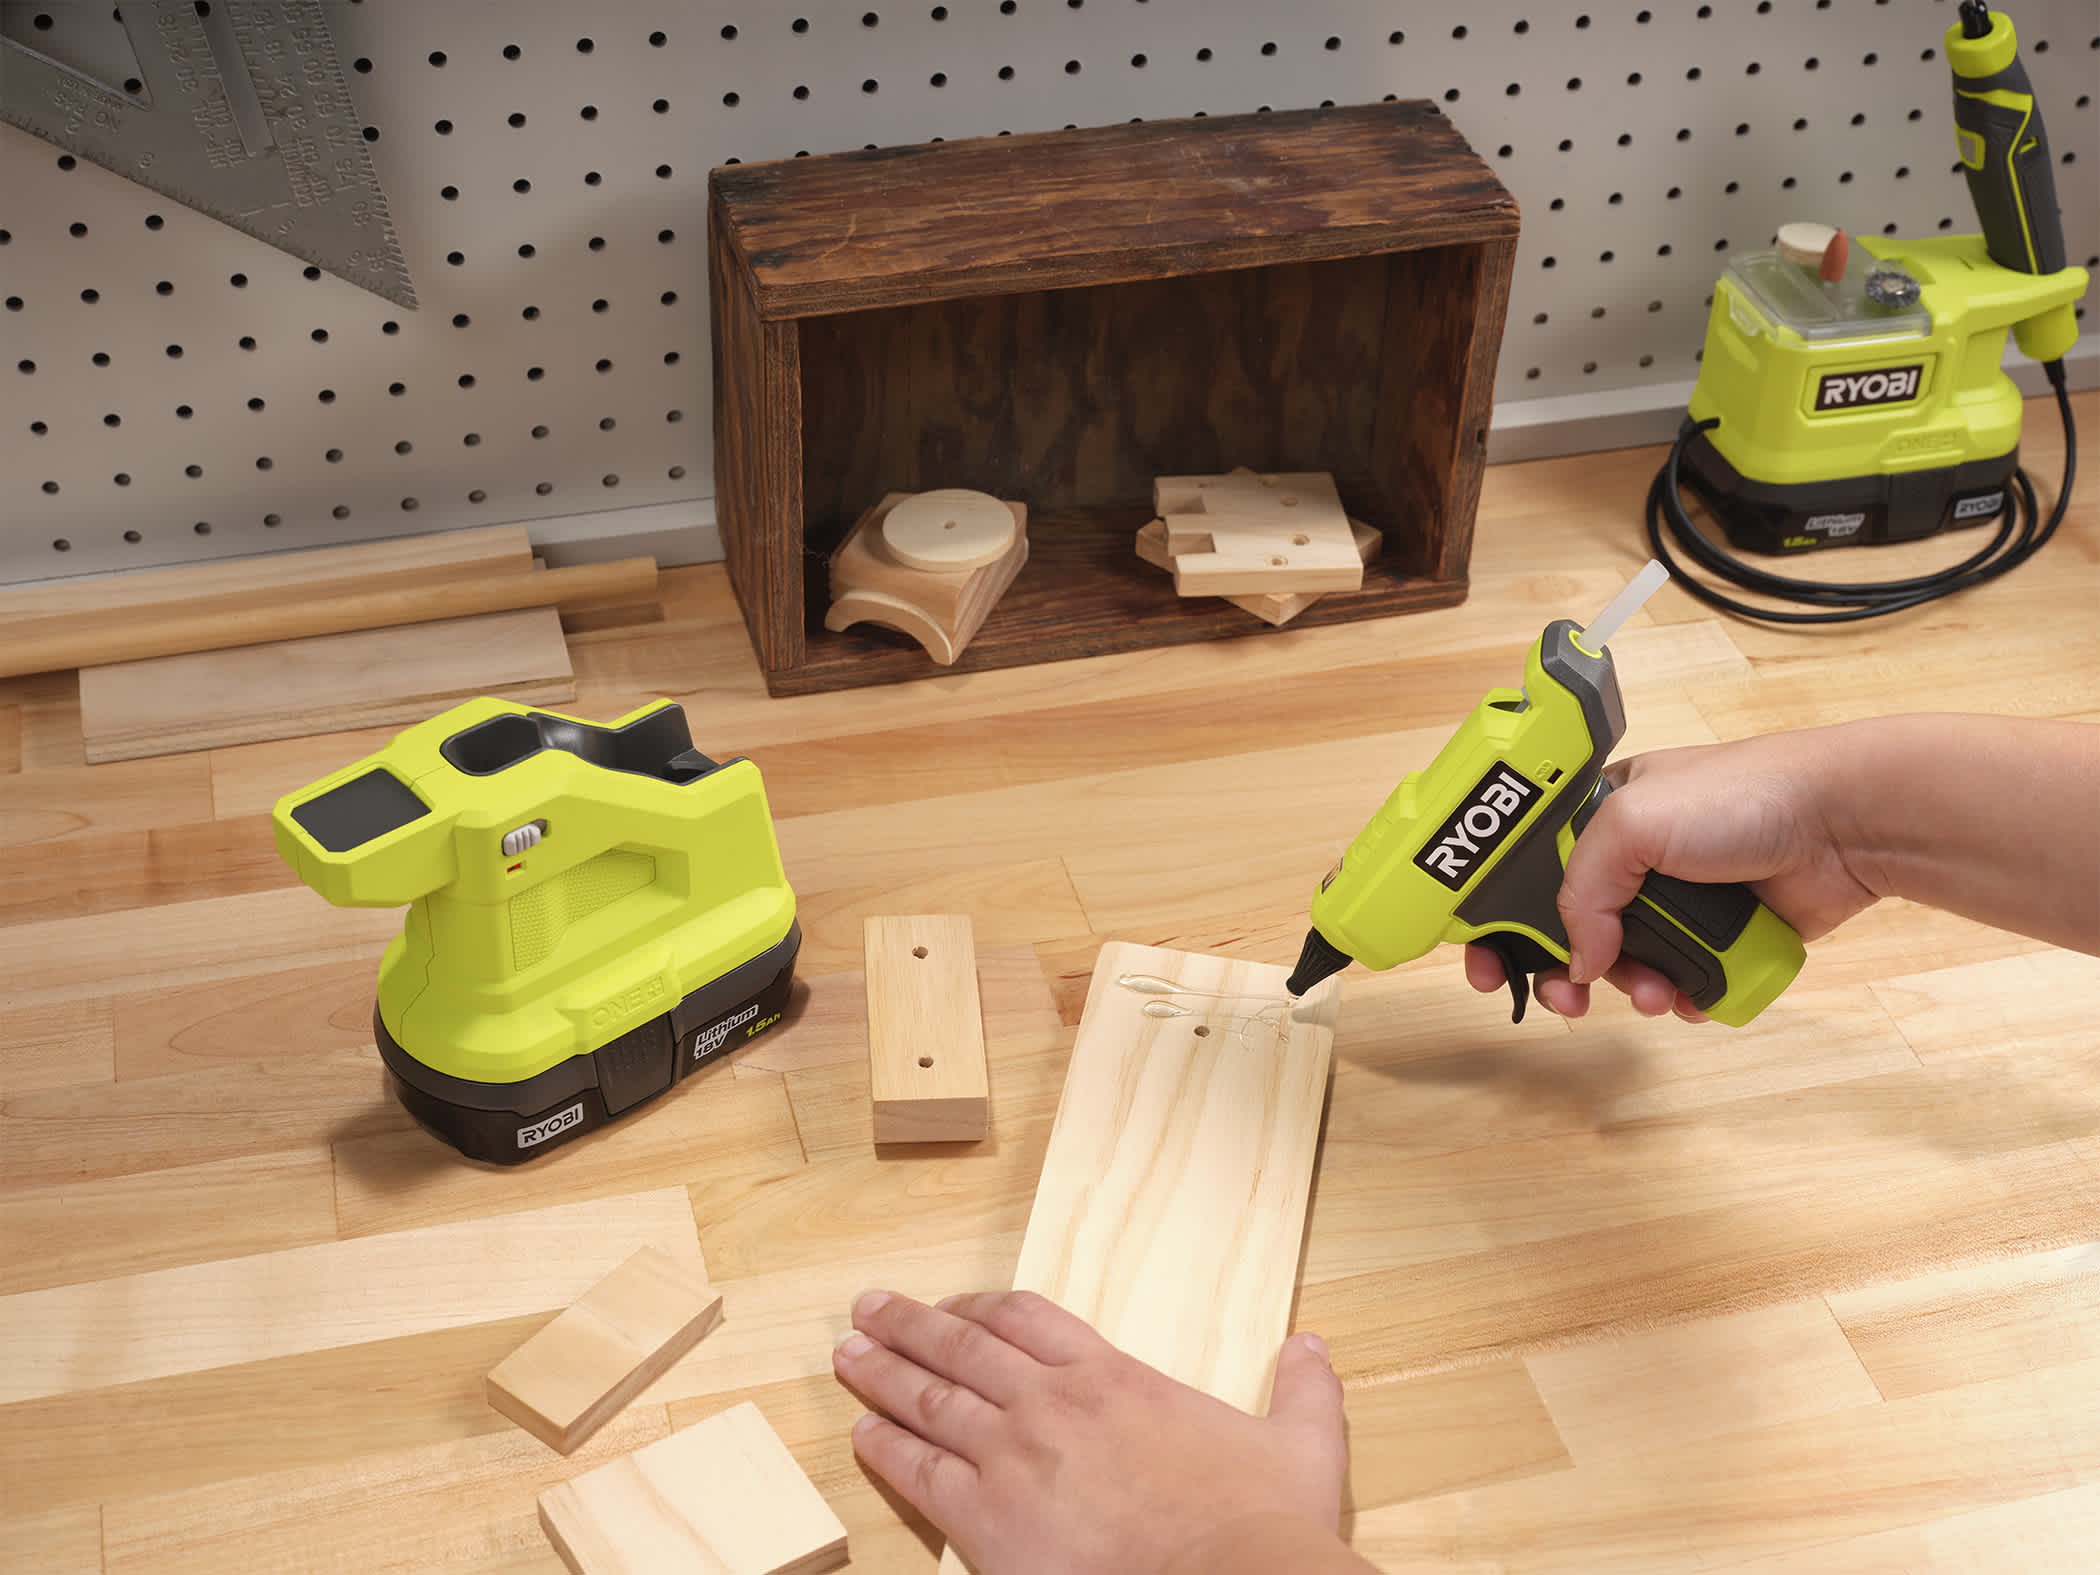 Product Features Image for 18V ONE+ Compact Glue Gun.